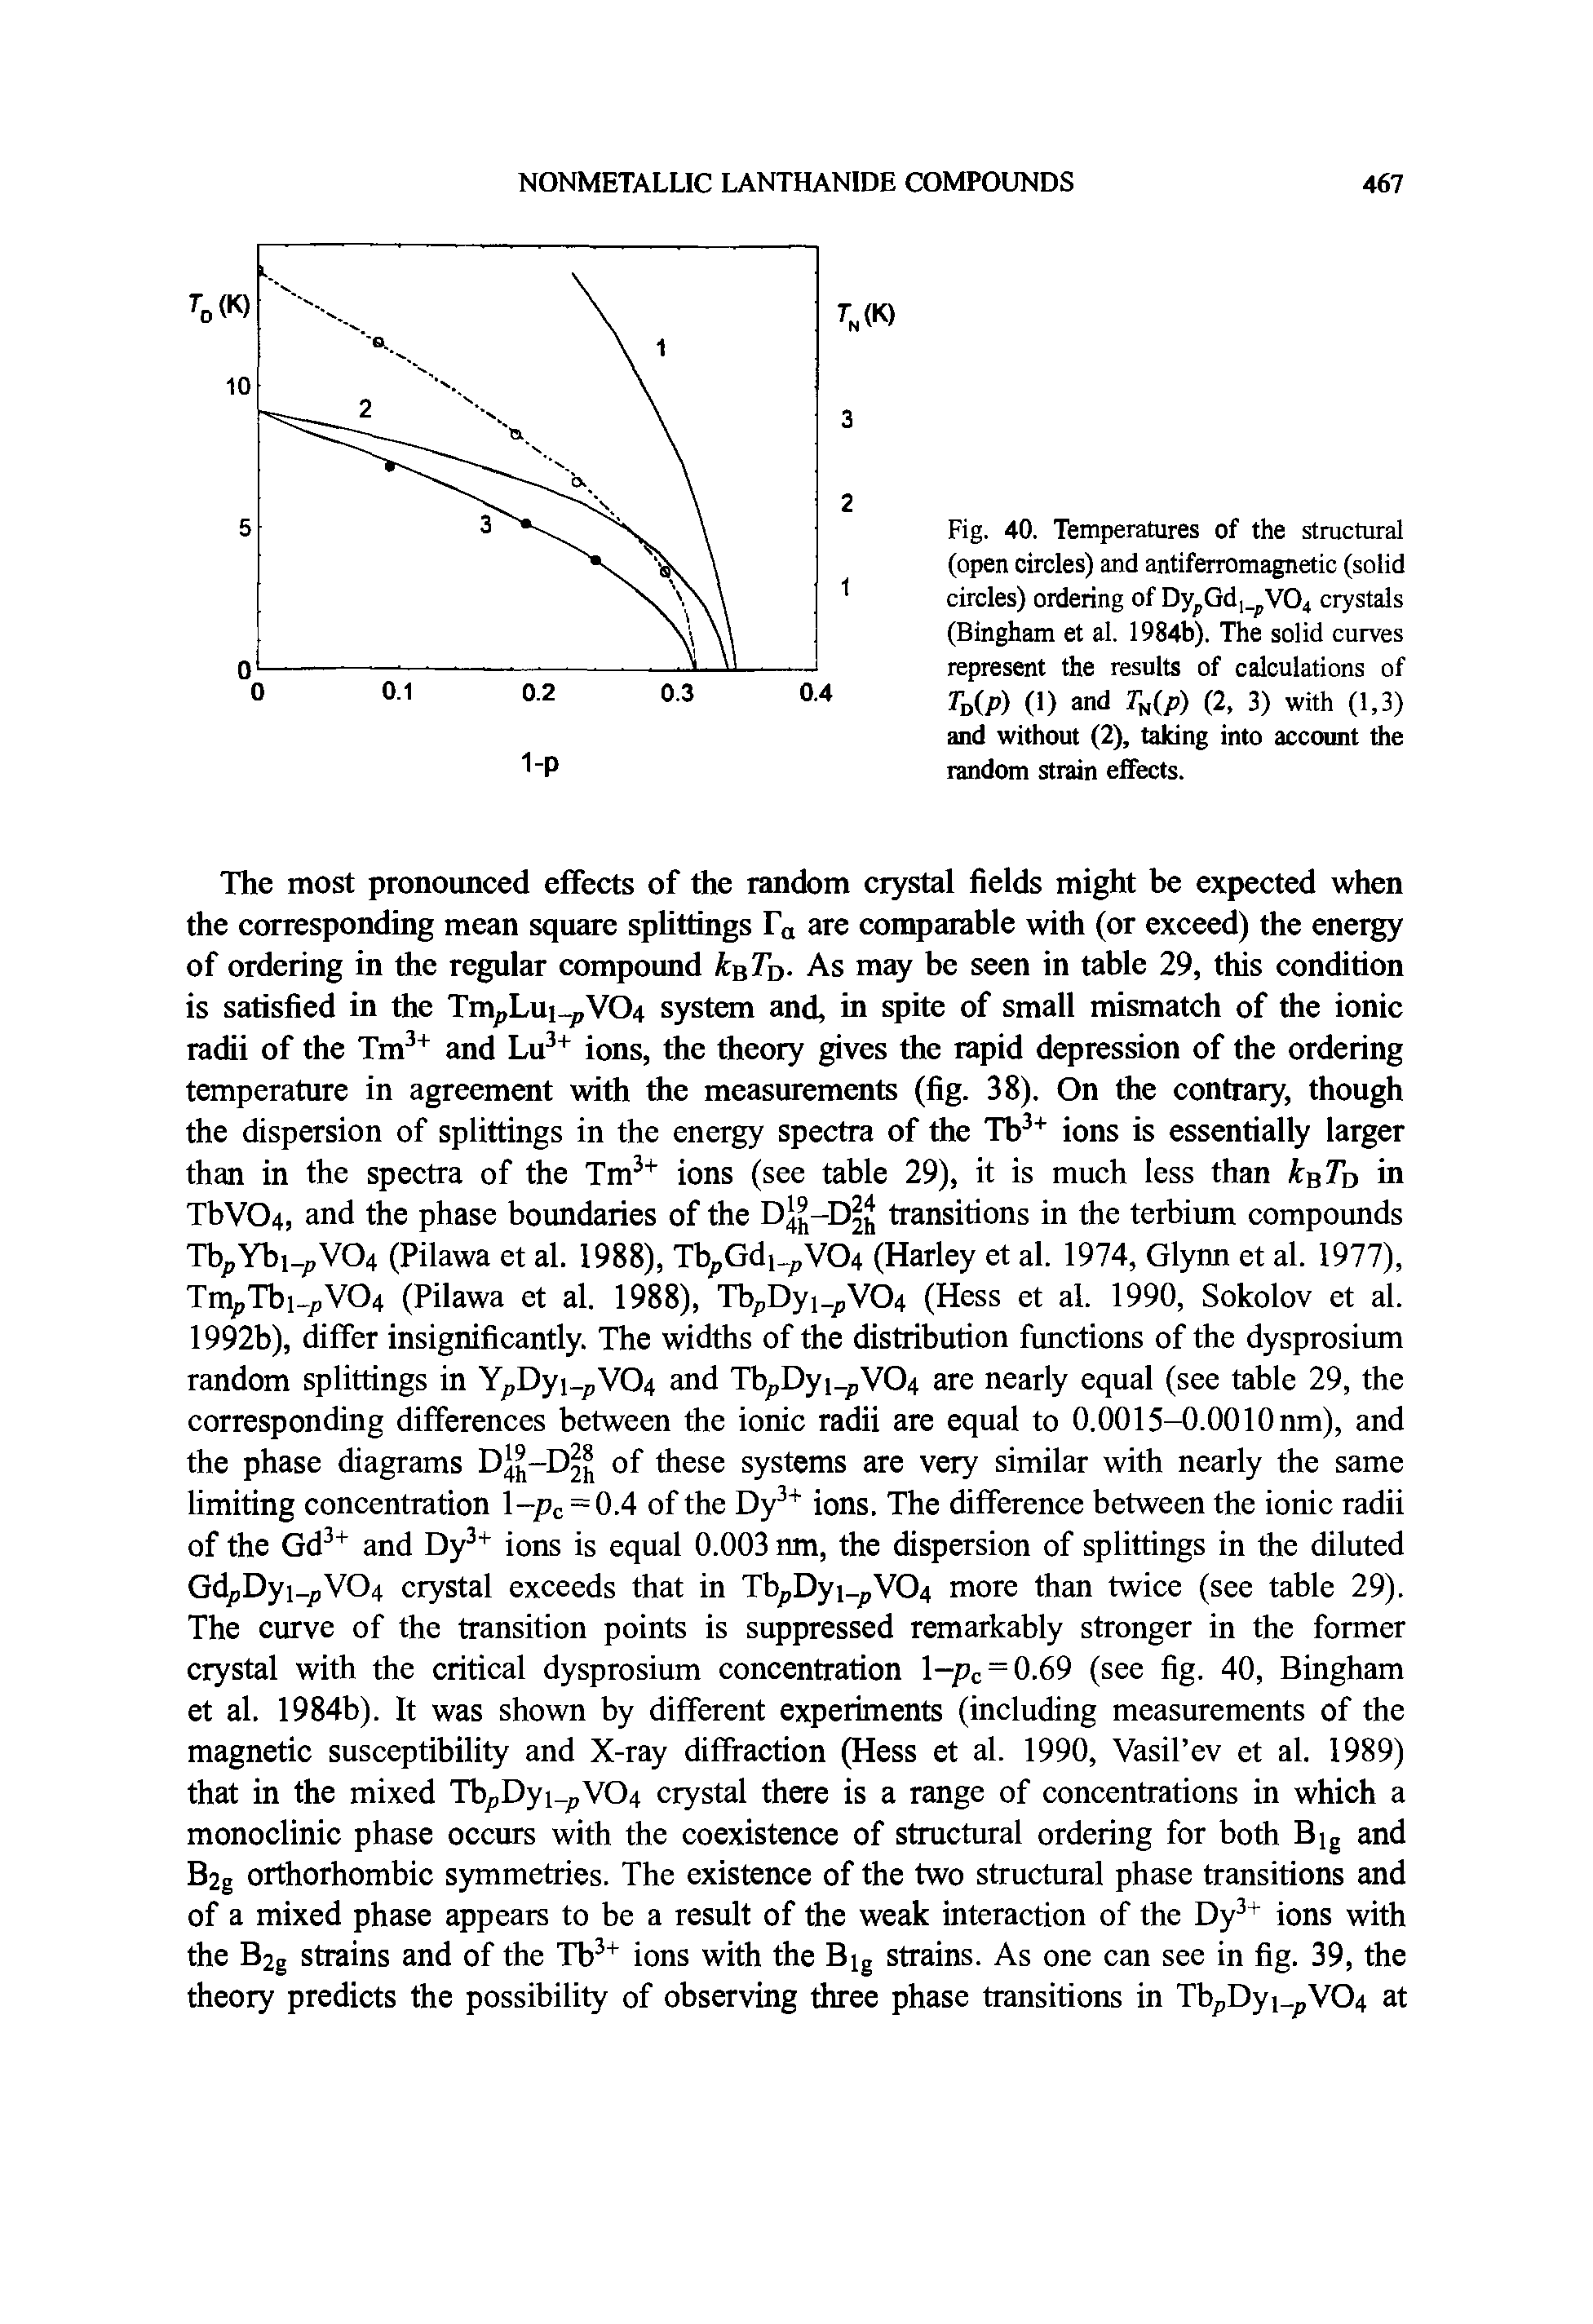 Fig. 40. Temperatures of the structural (open circles) and antiferromagnetic (solid circles) ordering of Dy Gd, V04 crystals (Bingham et al. 1984b). The solid curves represent the results of calculations of r (p) (1) and Tn(/p) (2, 3) with (1,3) and without (2), taking into account the random strain effects.